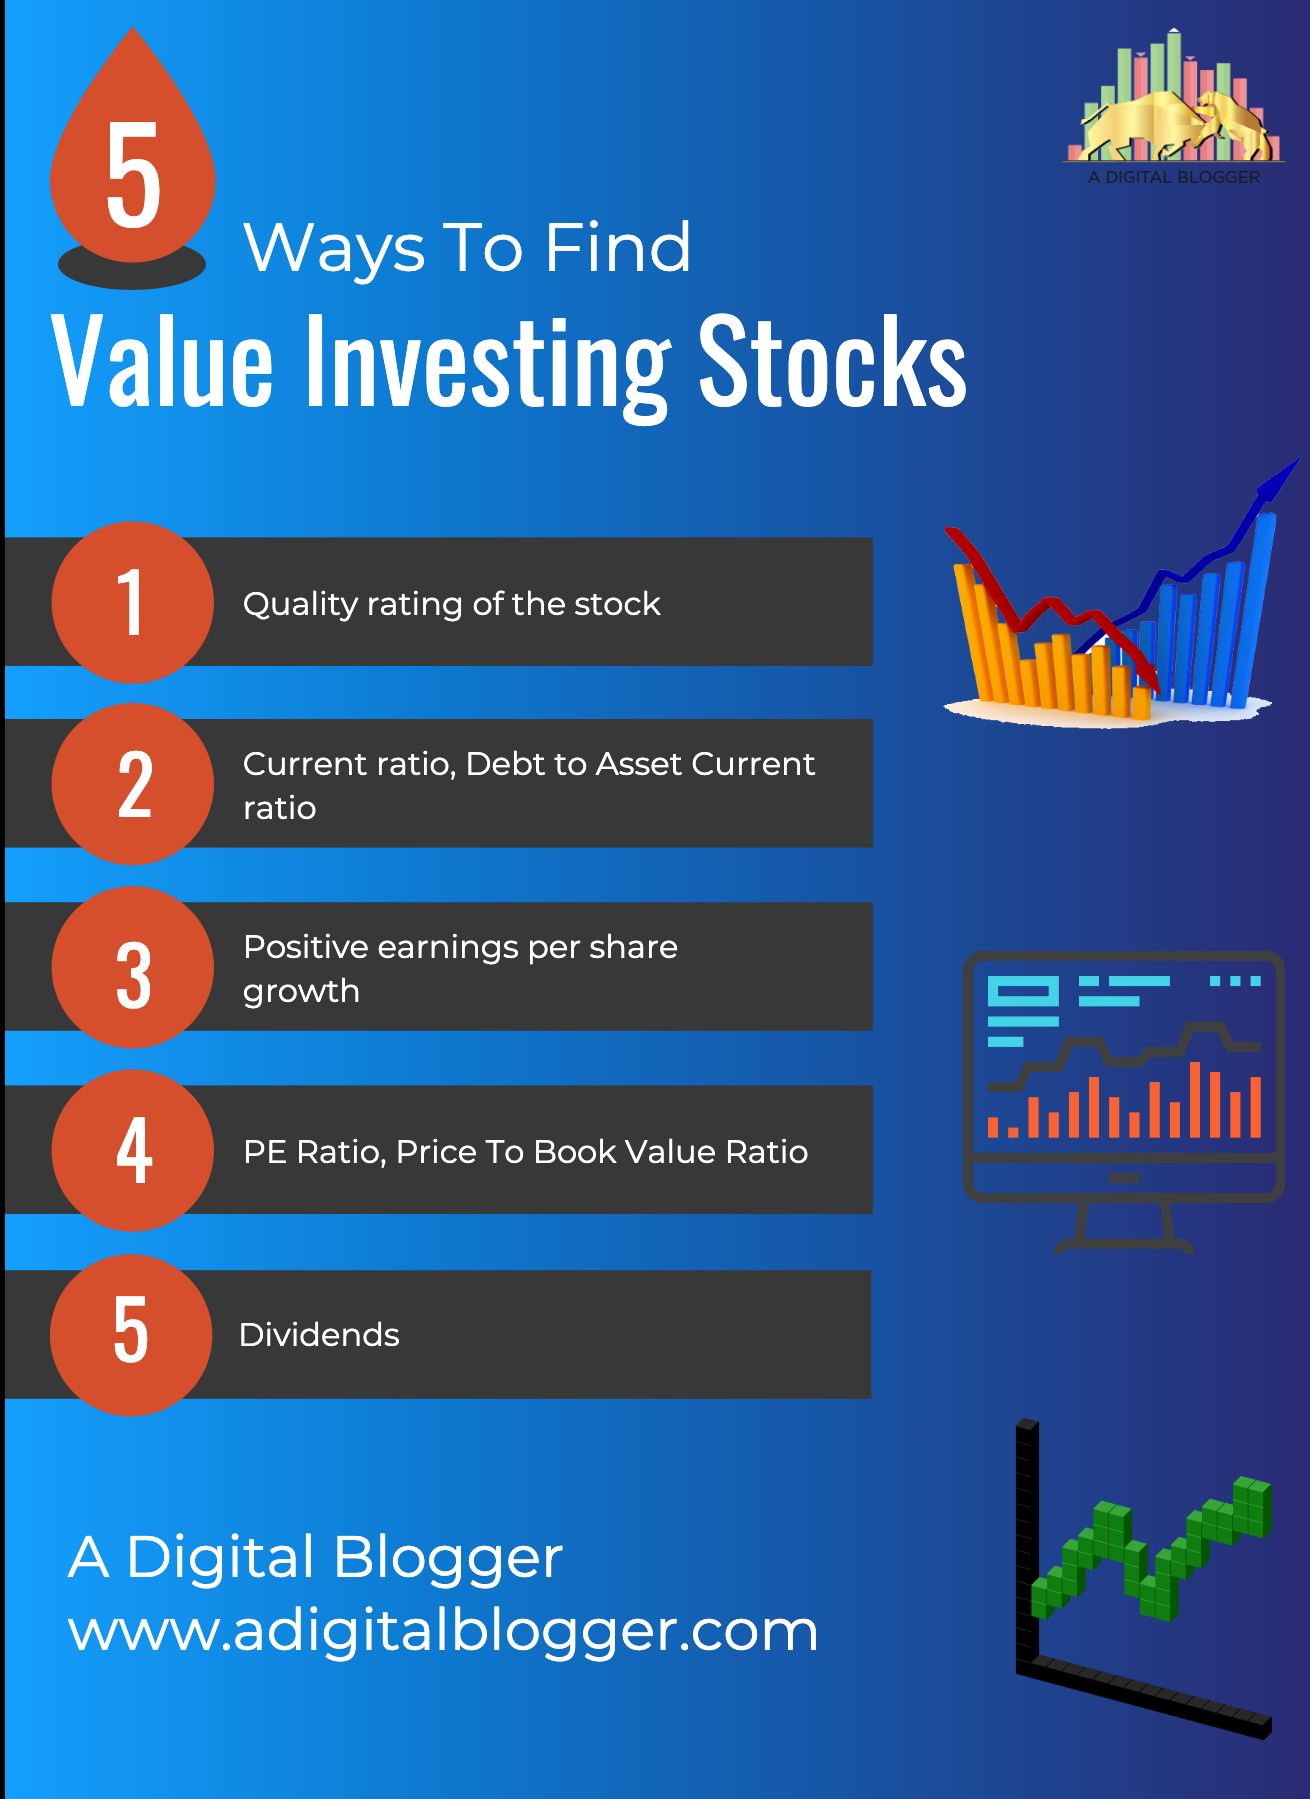 Value investing india stocks purepoint financial reviews